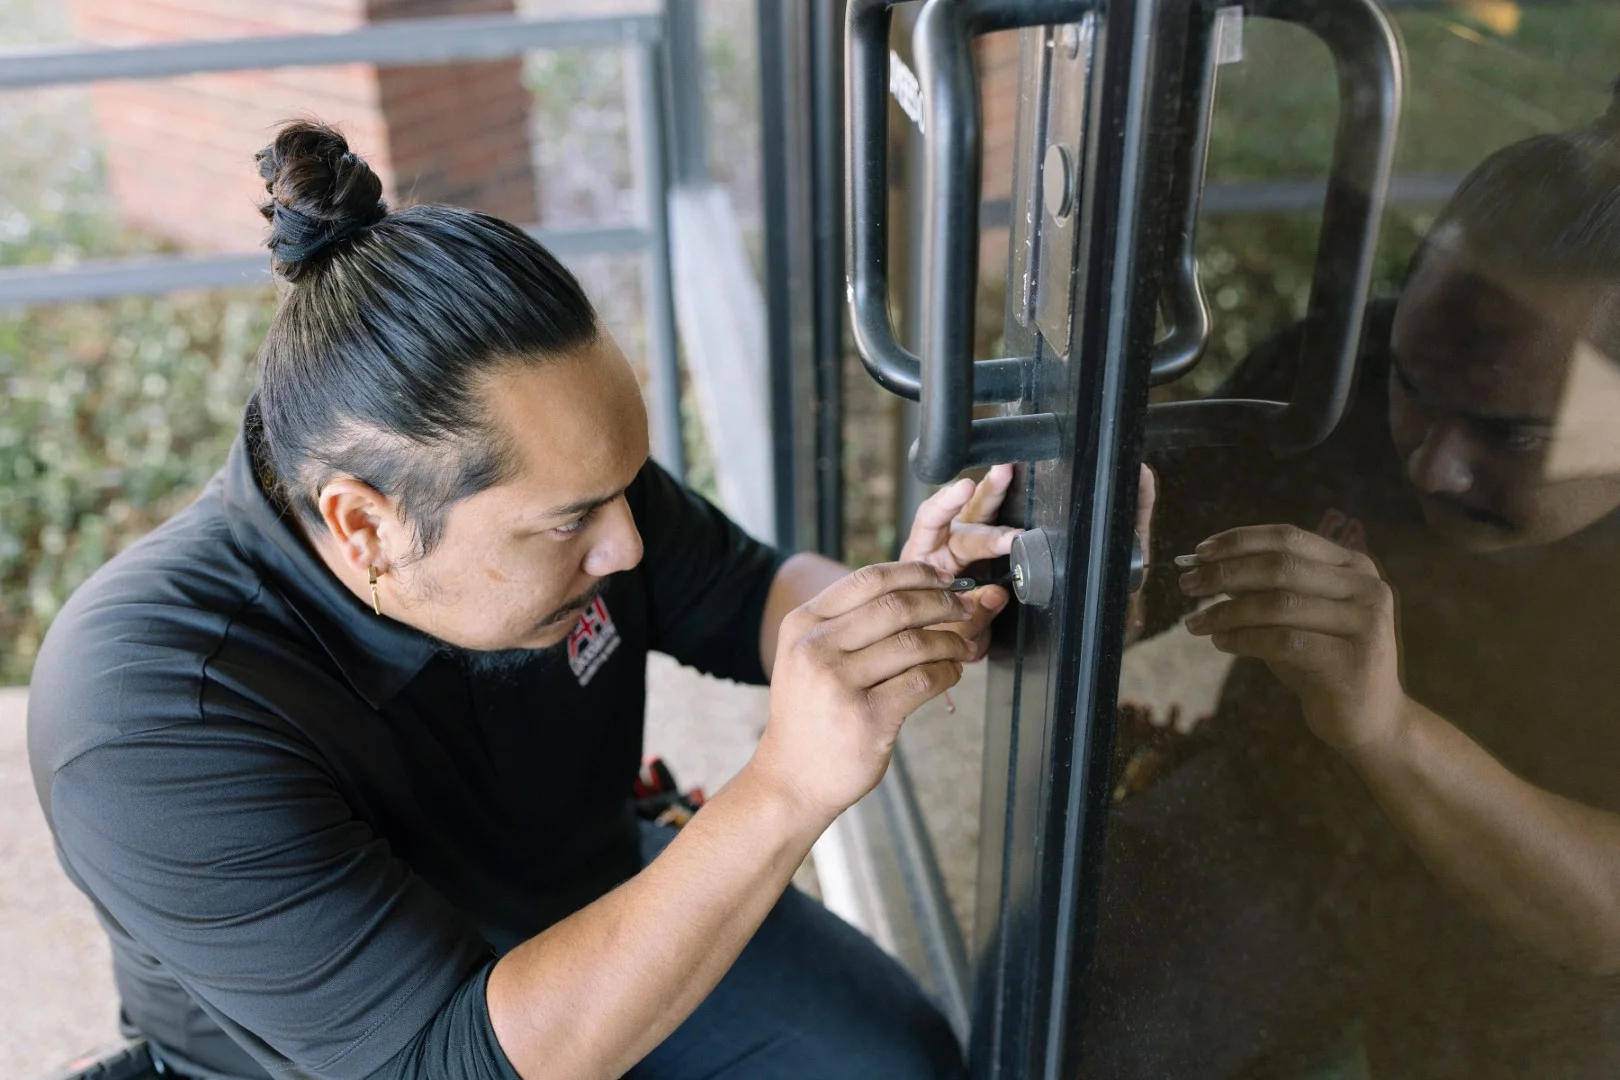 Dallas-Fort Worth Commercial Locksmith Services